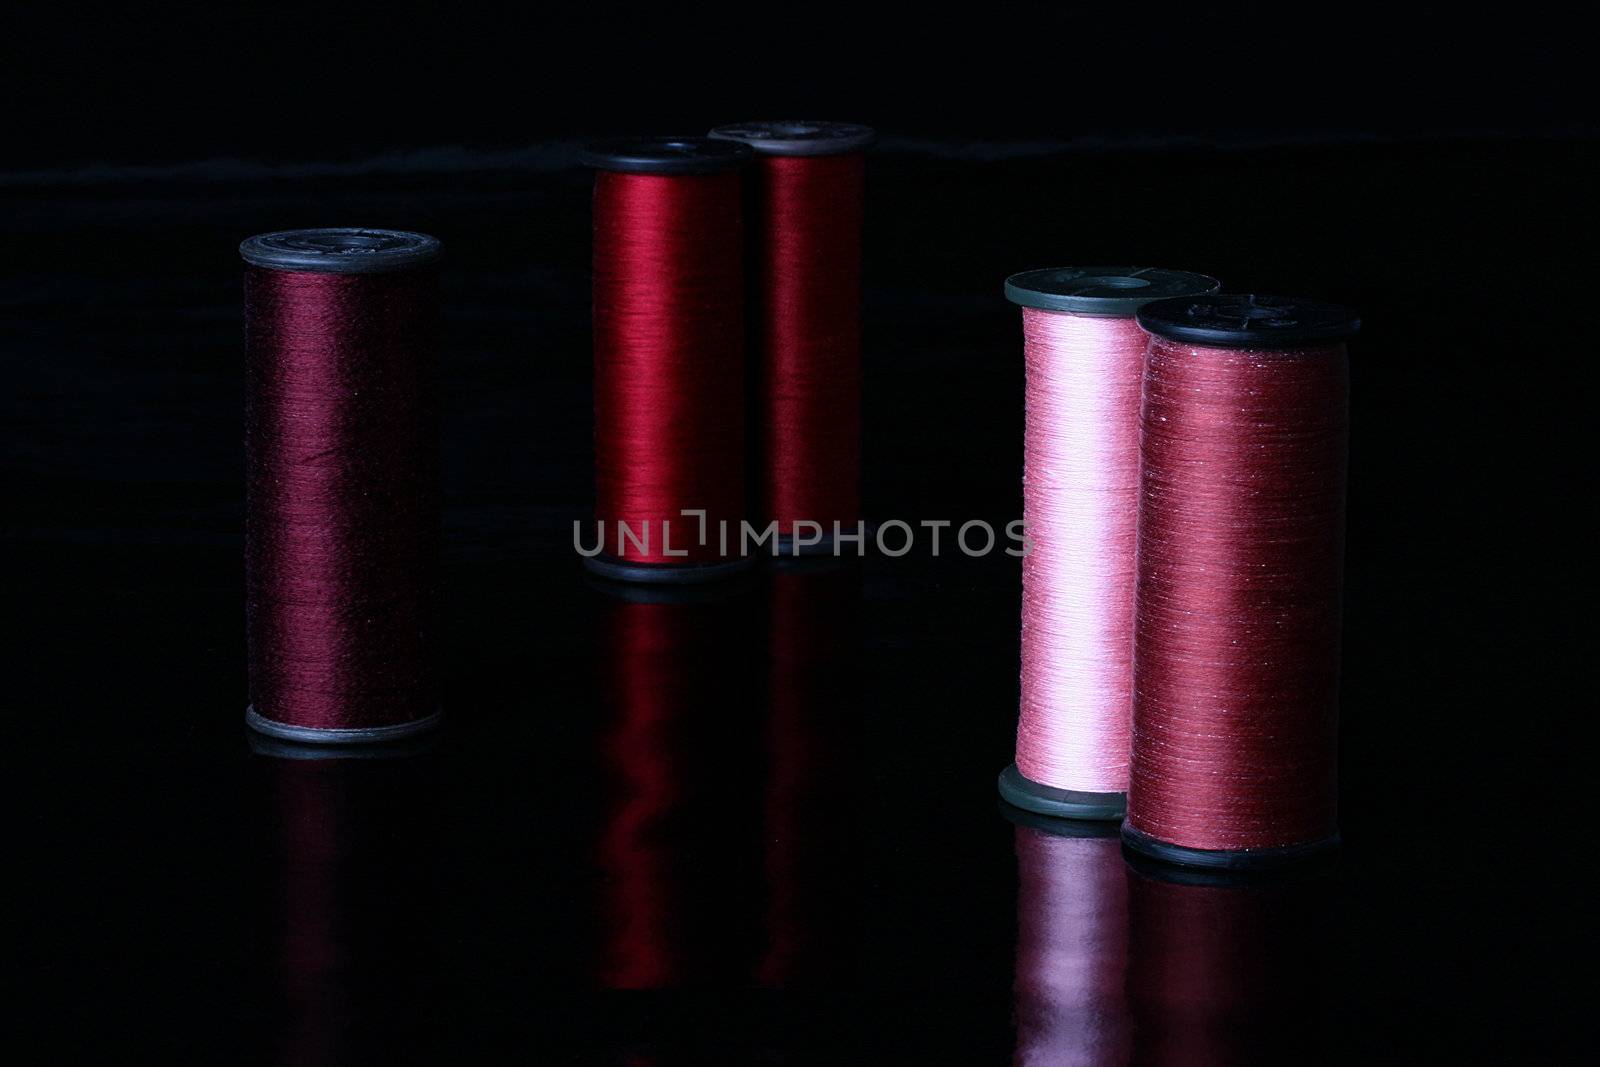 Colour threads on coils, a background - black, reflecting.